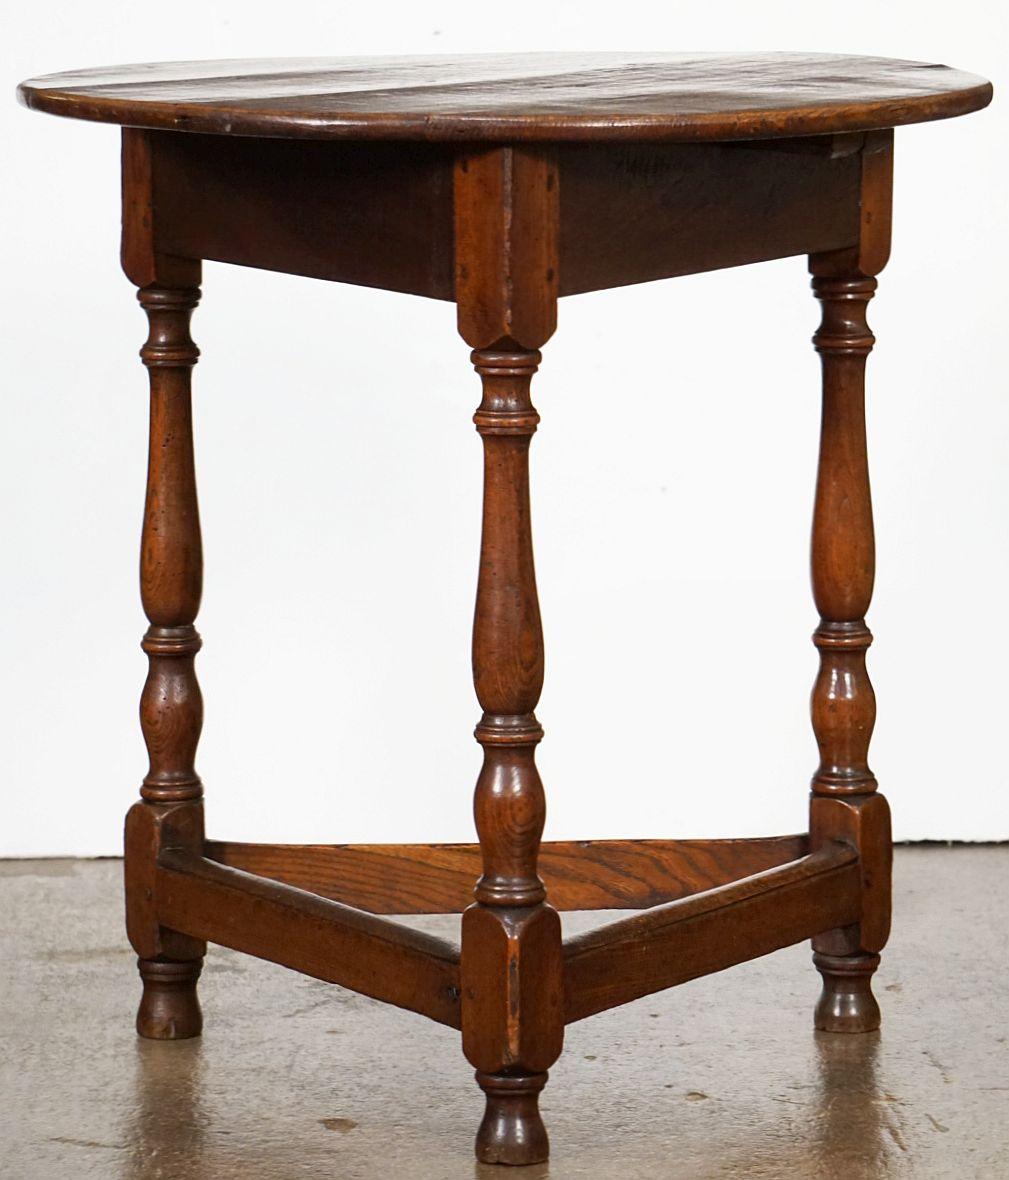 A fine English cricket table of patinated oak and ash from the late George III period, featuring the traditional round or circular top over a tripod base with turned supports, pegged joins, and triangular under-tier foot brace.

Makes a nice